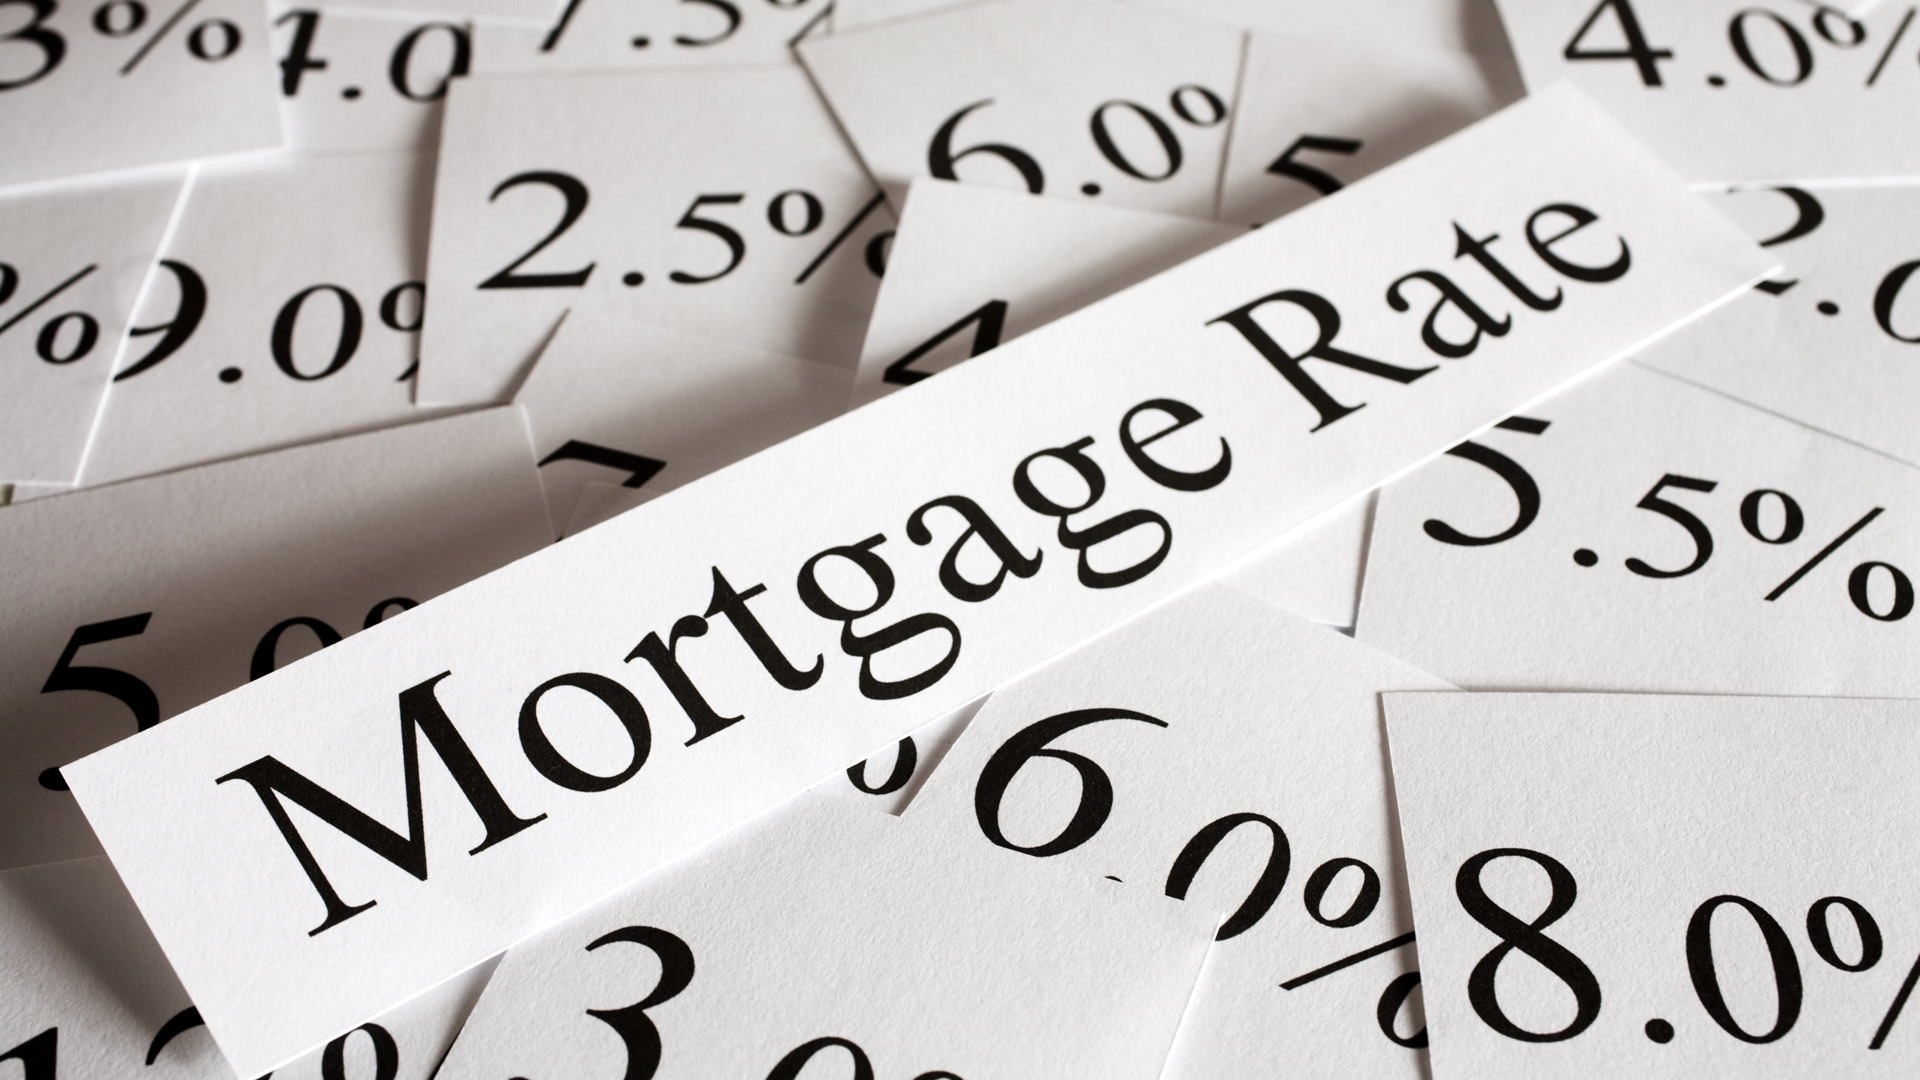 Benefits of Low Mortgage Rates